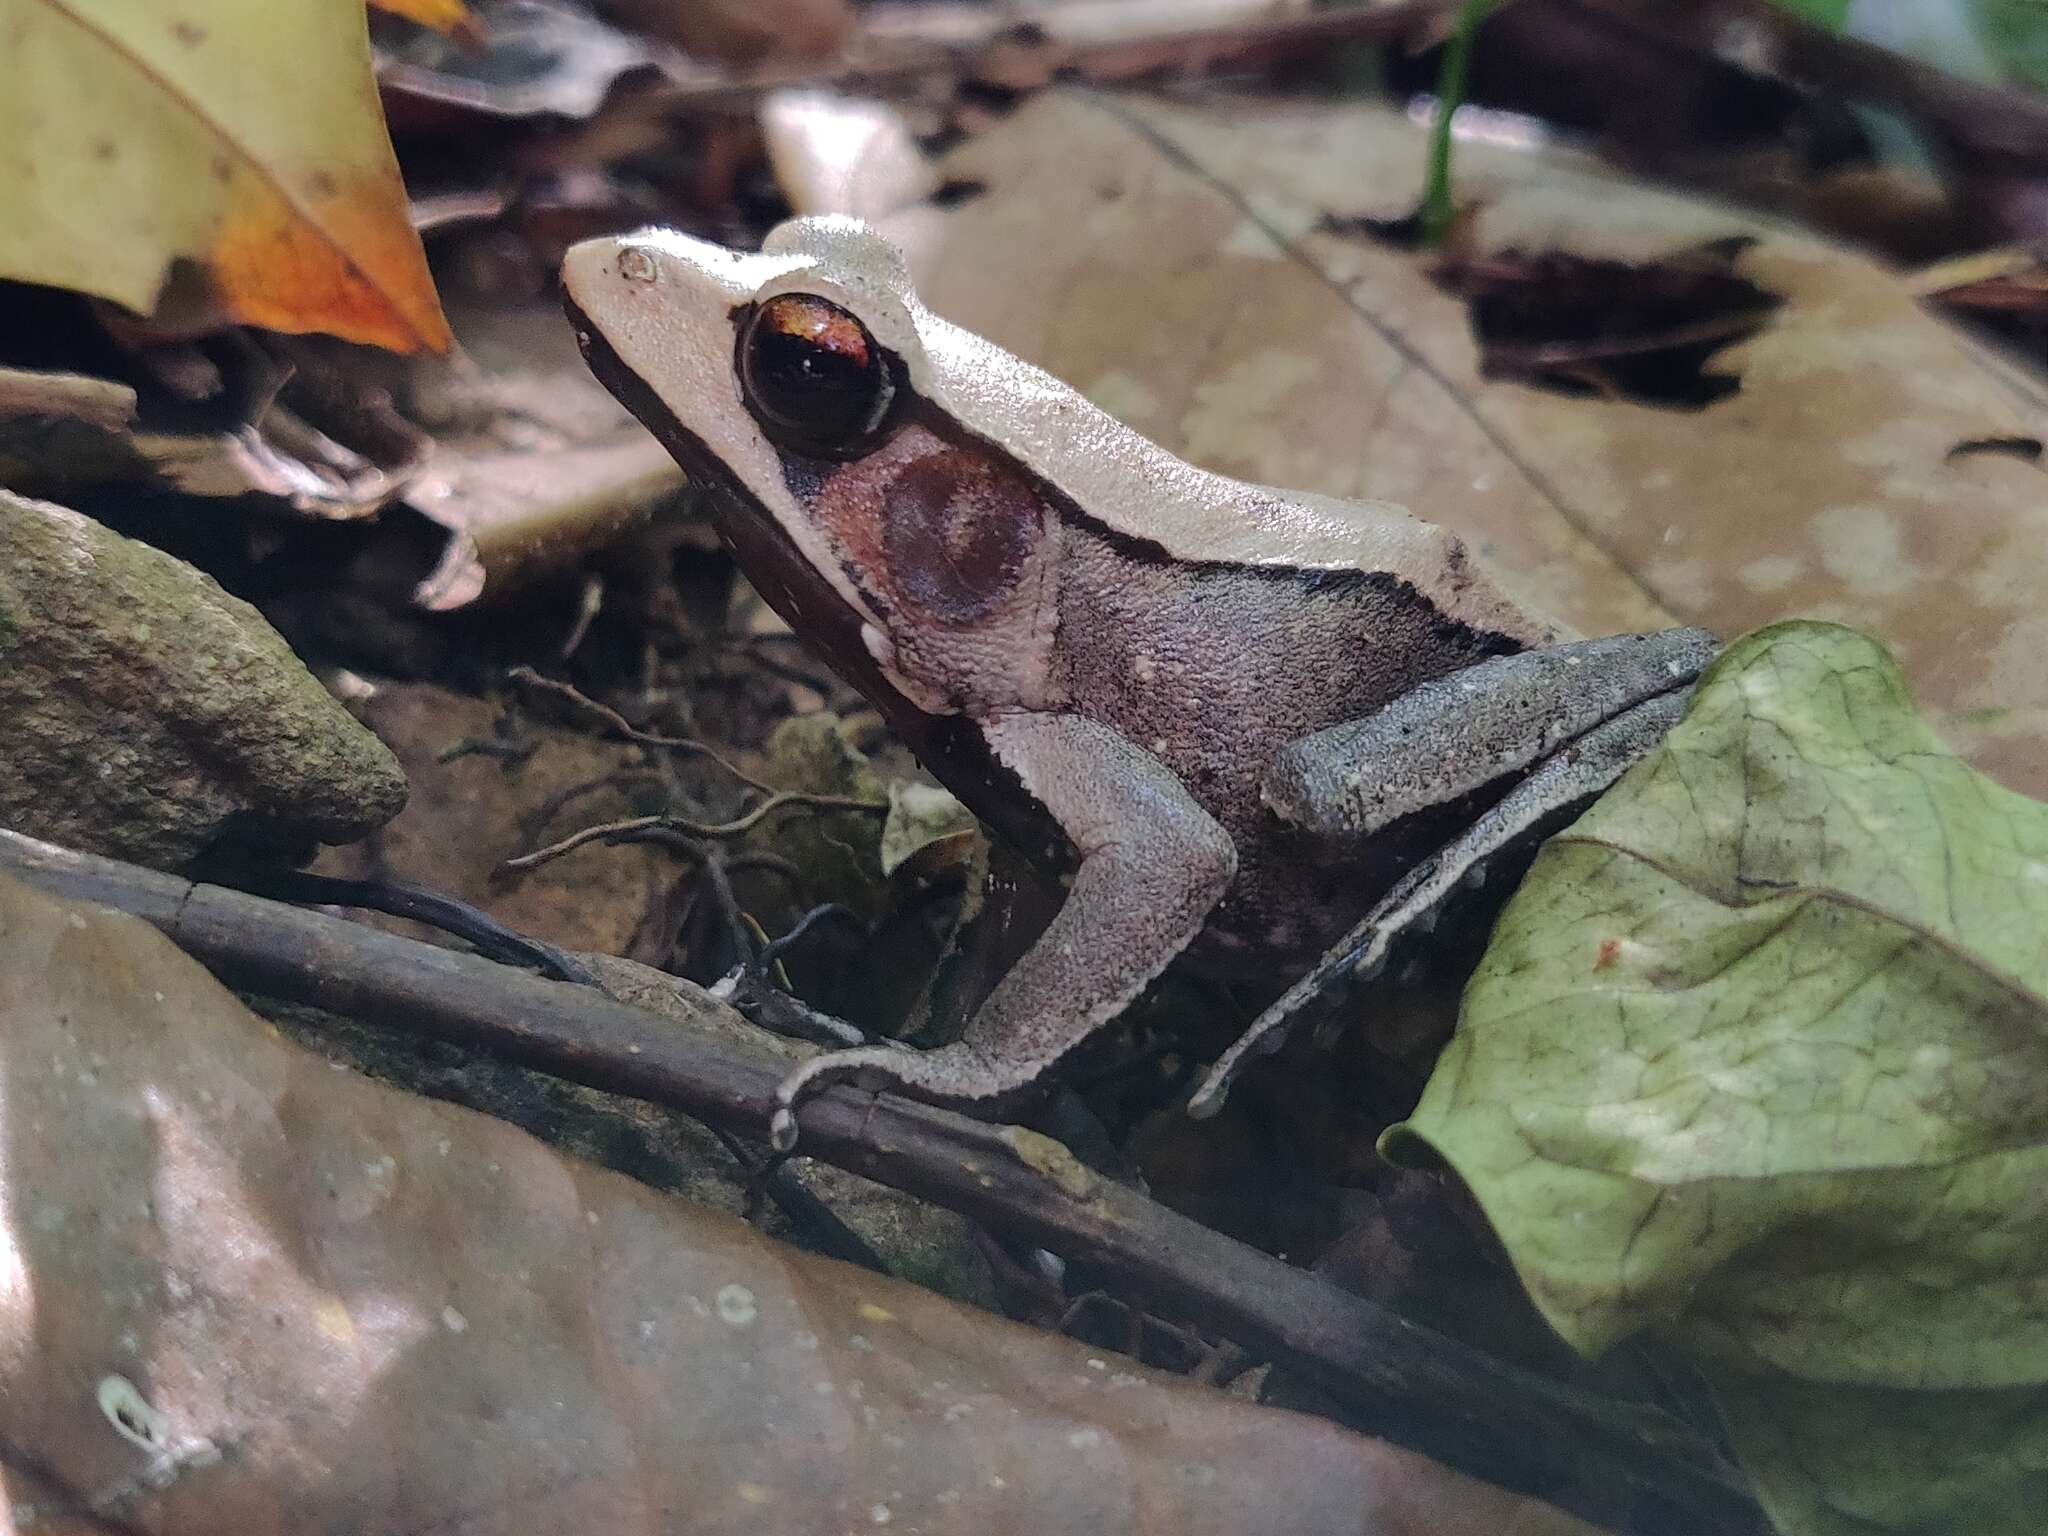 Image of Bicolored frog